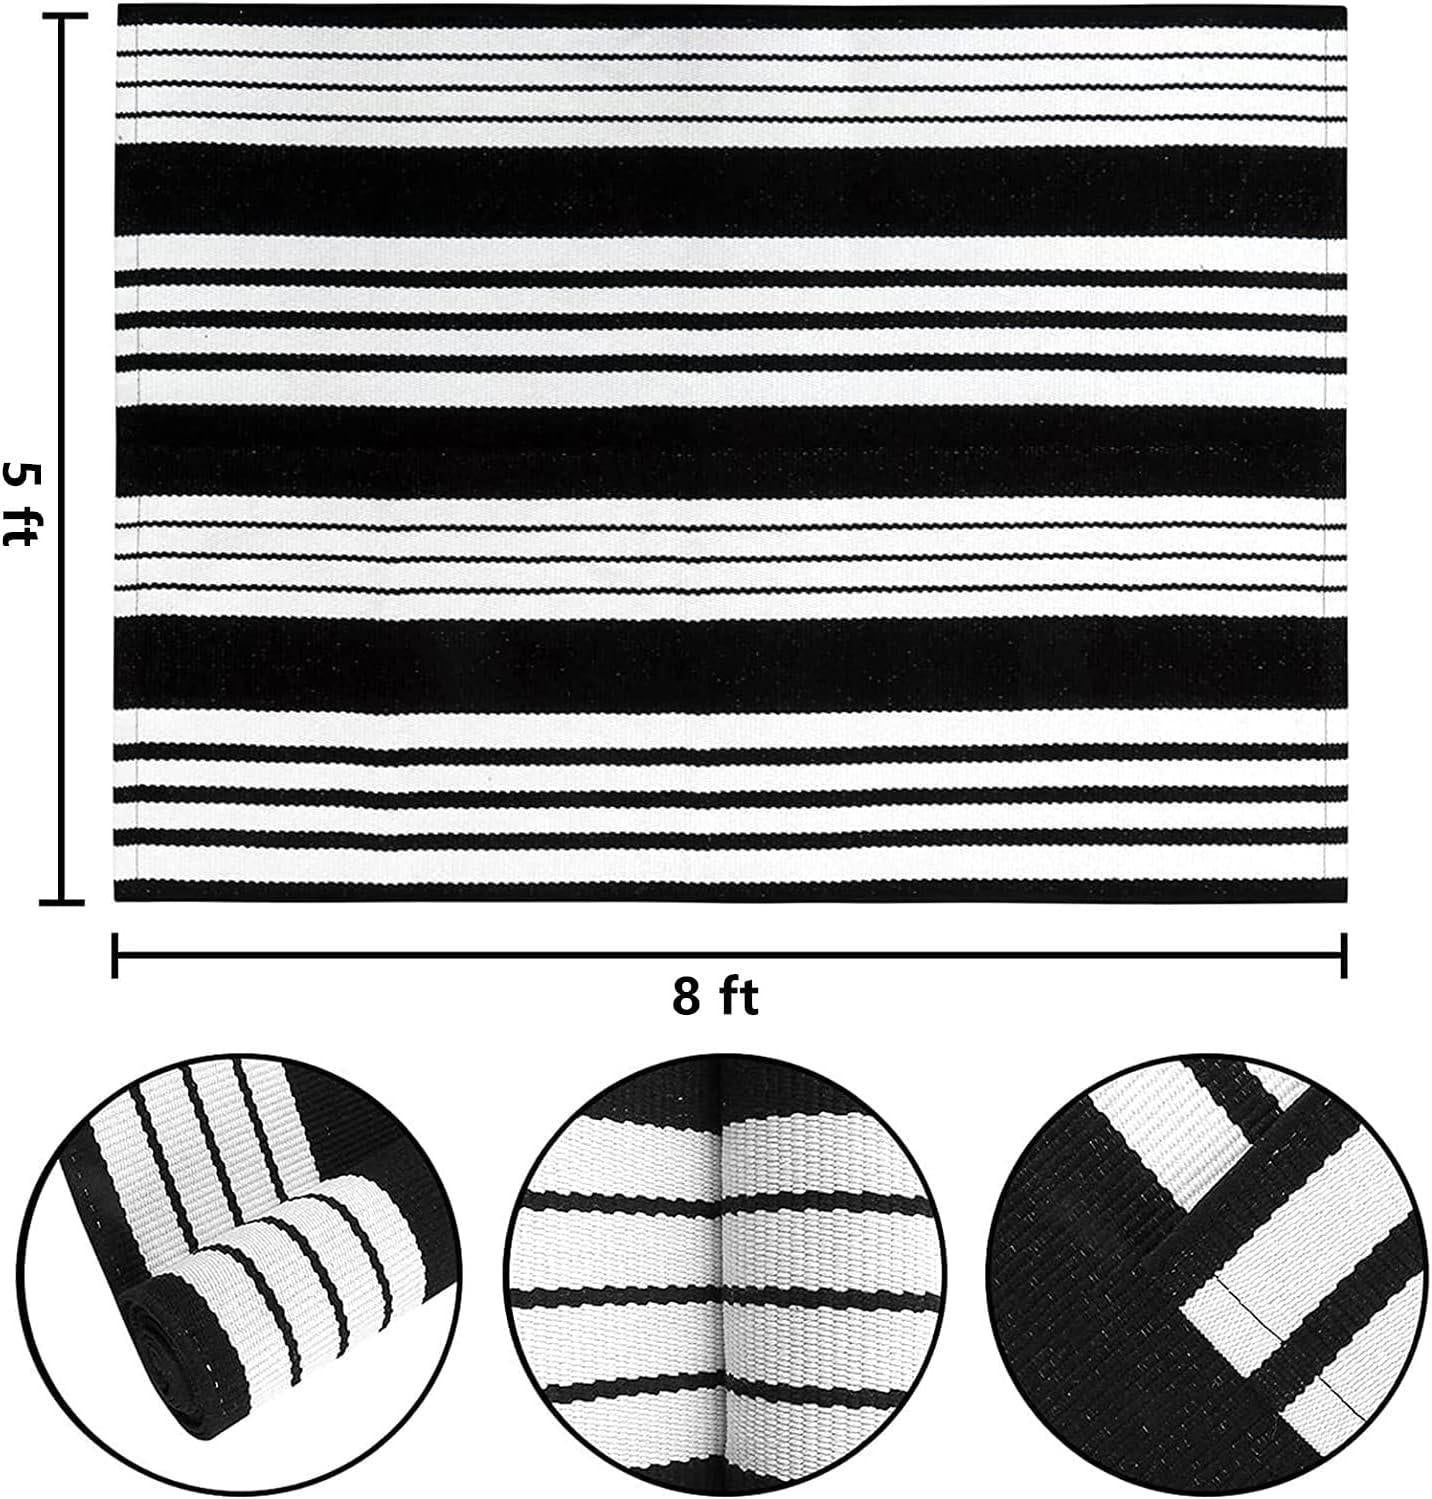 Black and White Outdoor Patio Rug Hand-Woven Cotton Striped Outdoor Rugs Washable Rug Indoor/Outdoor Area Rug Floor Mat